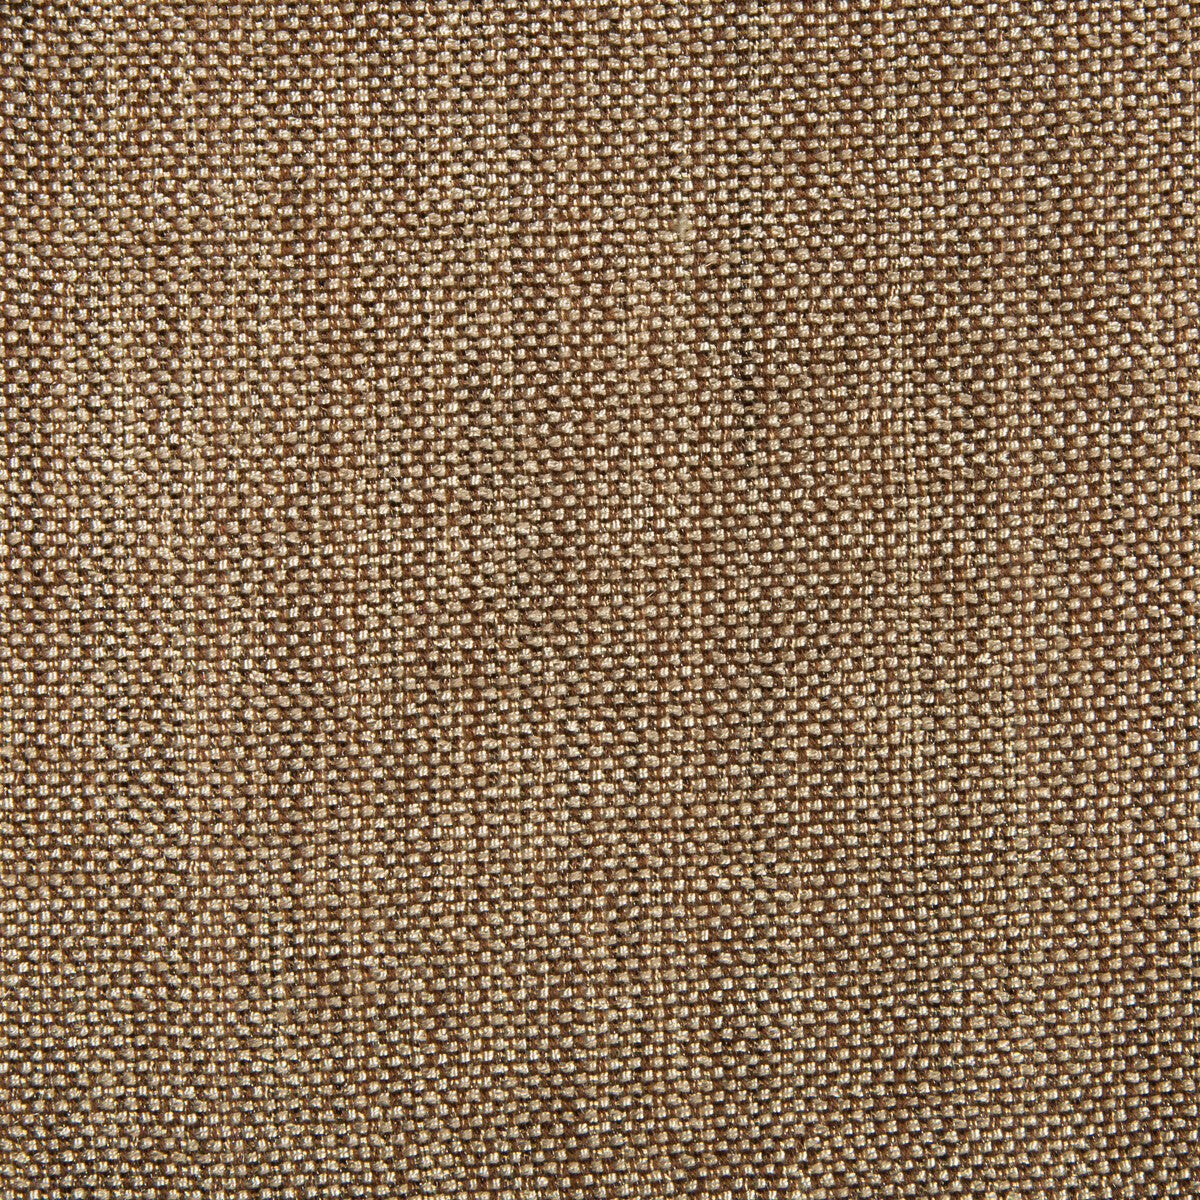 Kravet Contract fabric in 4458-606 color - pattern 4458.606.0 - by Kravet Contract